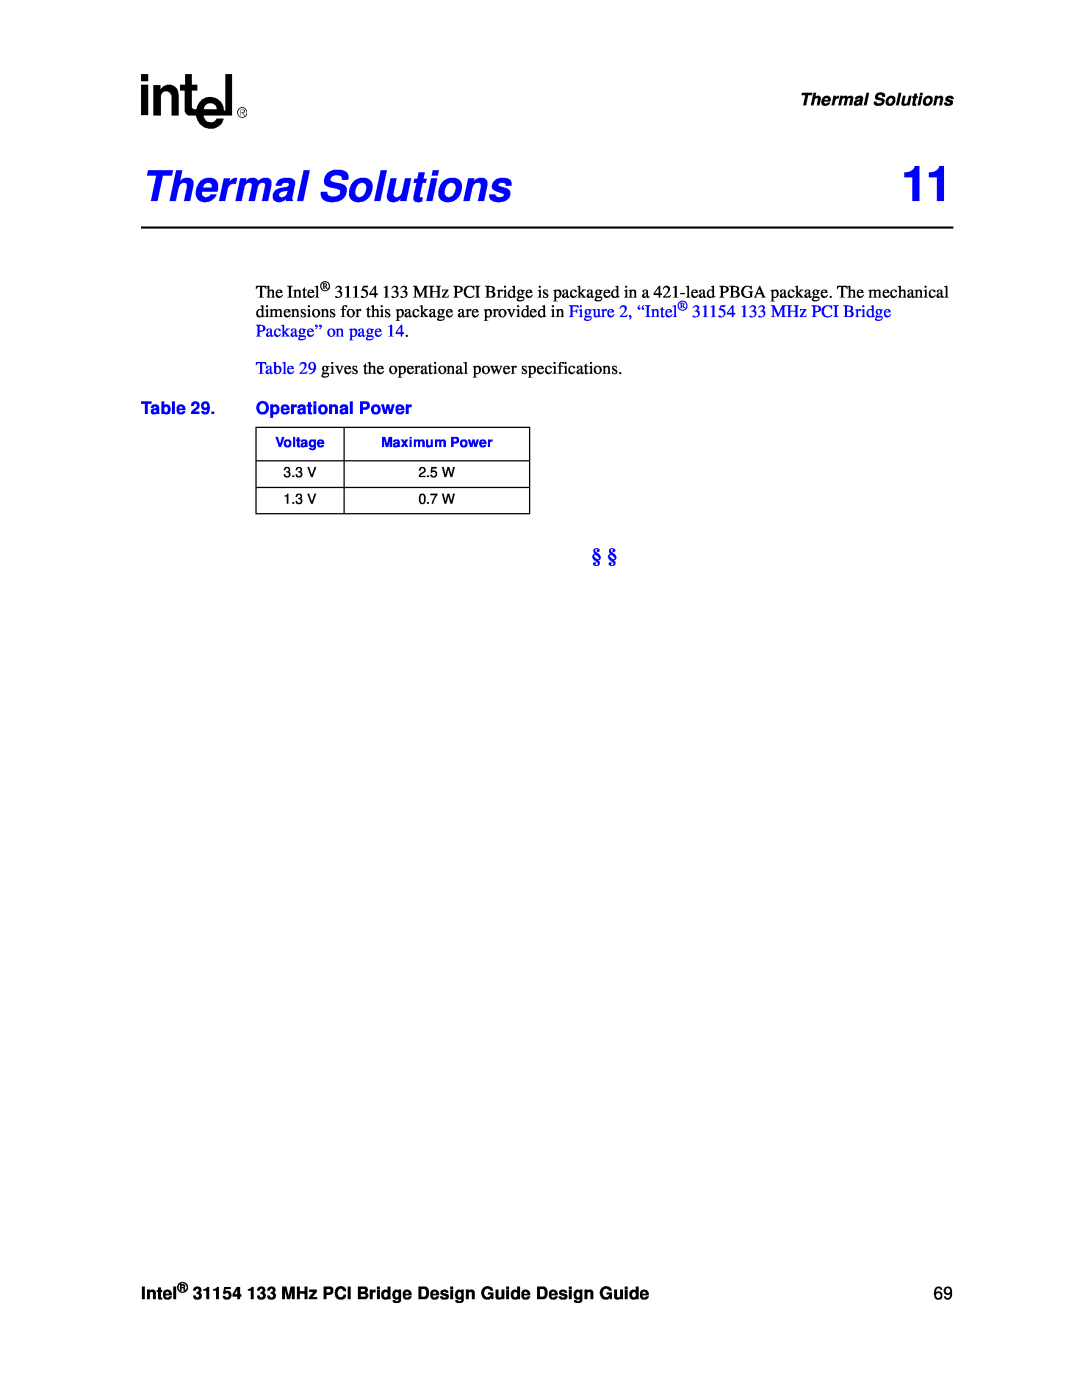 Intel manual Thermal Solutions, Operational Power, Intel 31154 133 MHz PCI Bridge Design Guide Design Guide, Voltage 